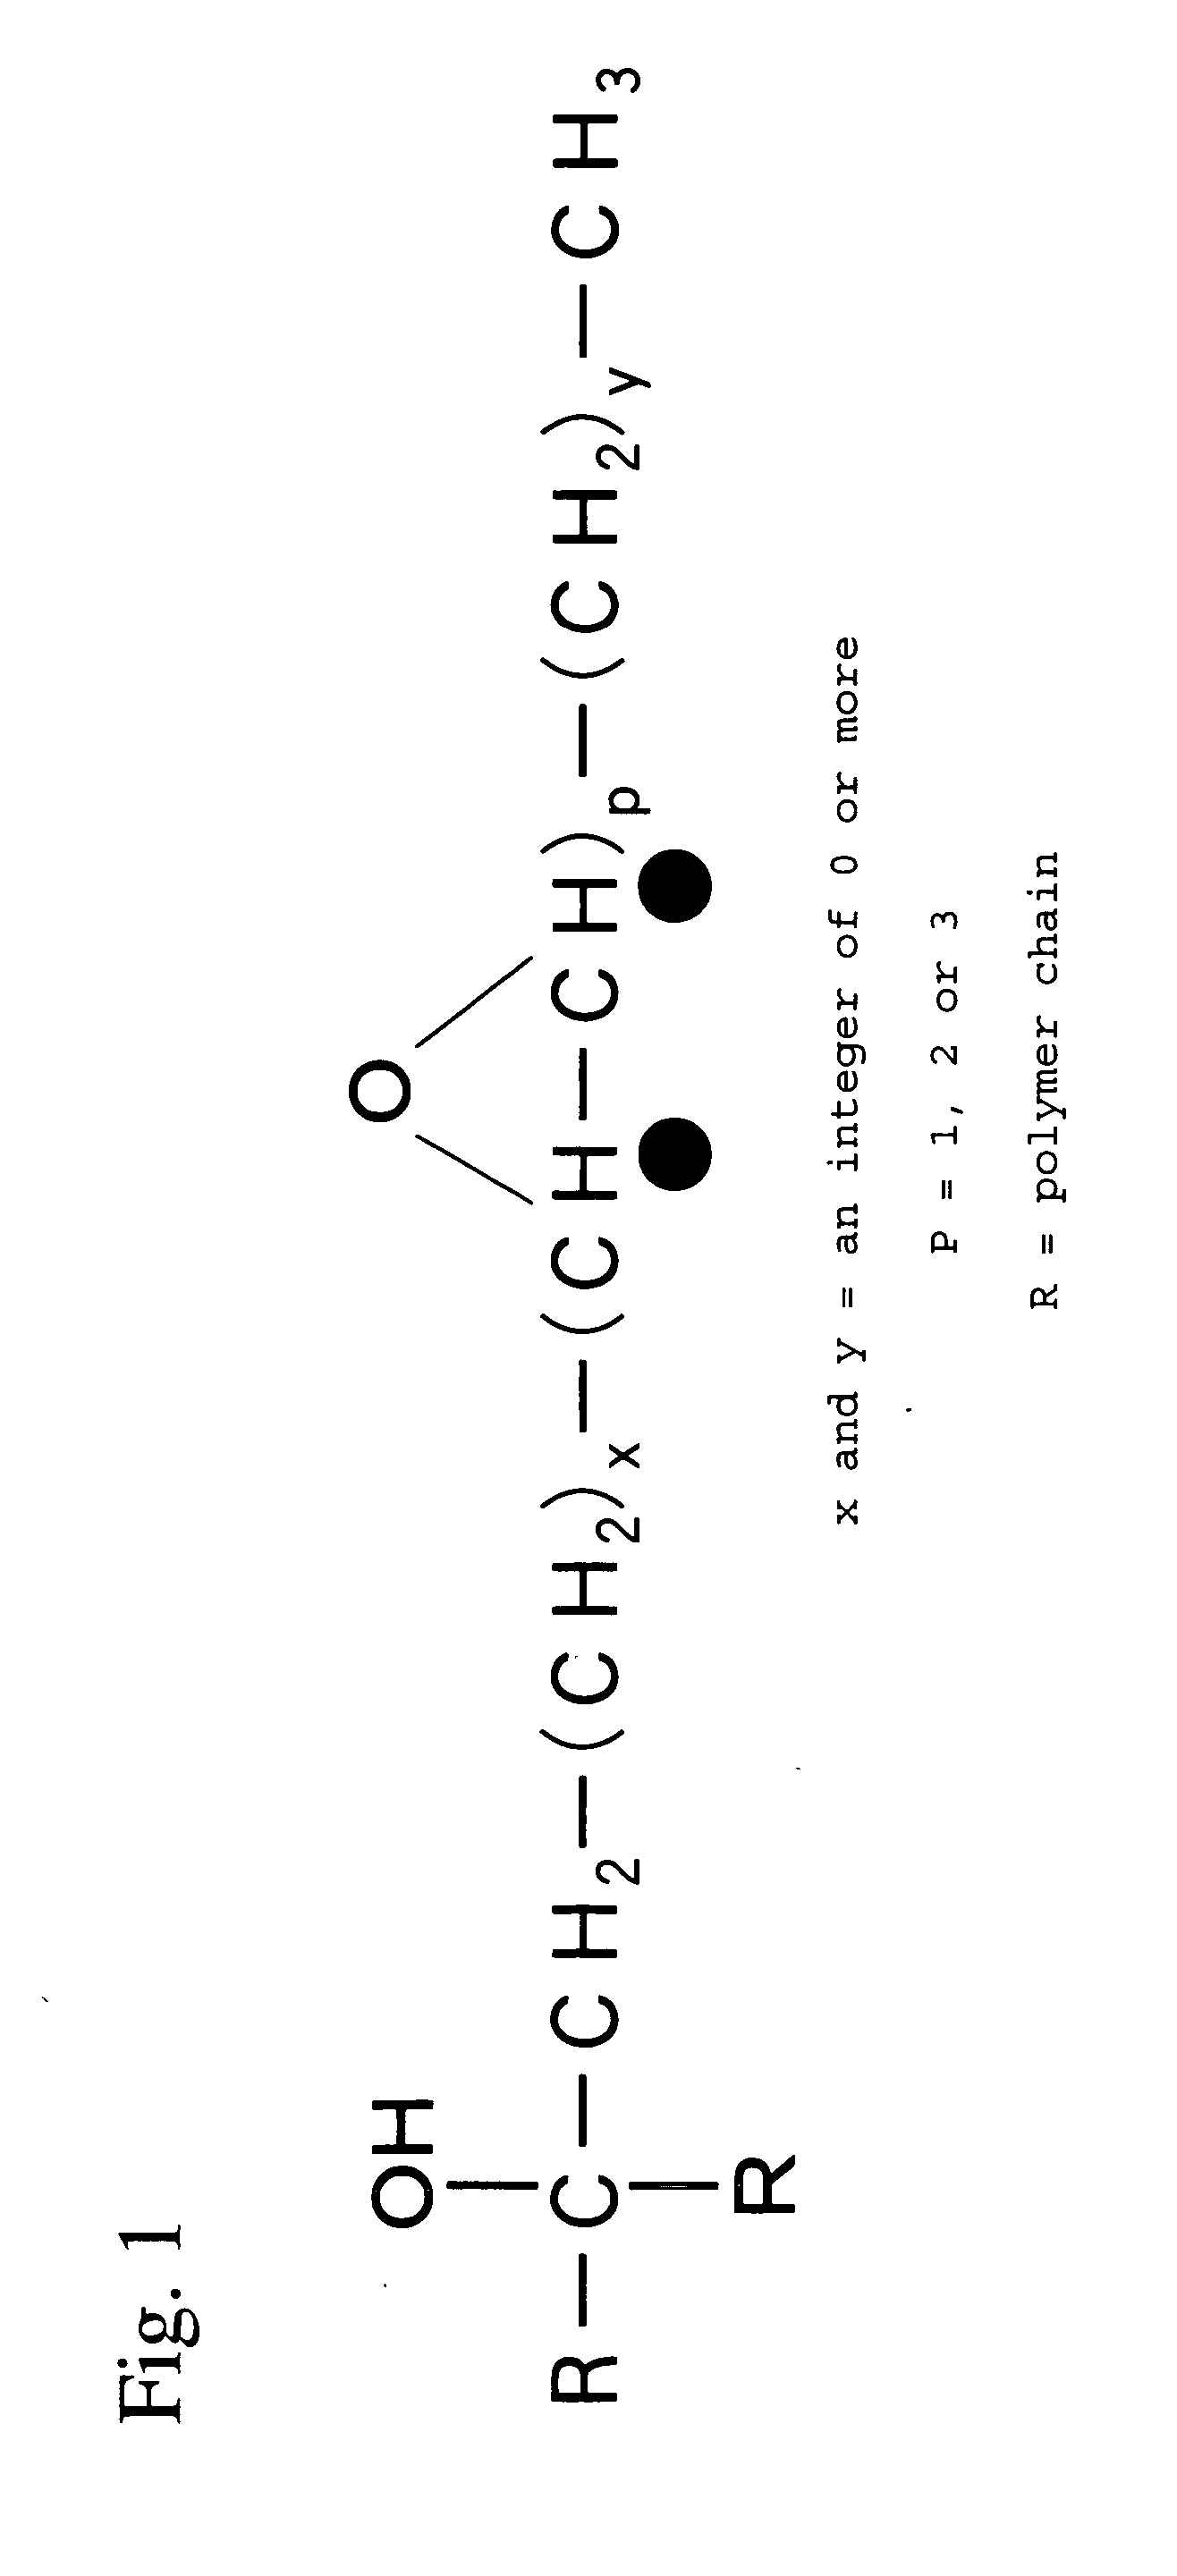 Block copolymer composition